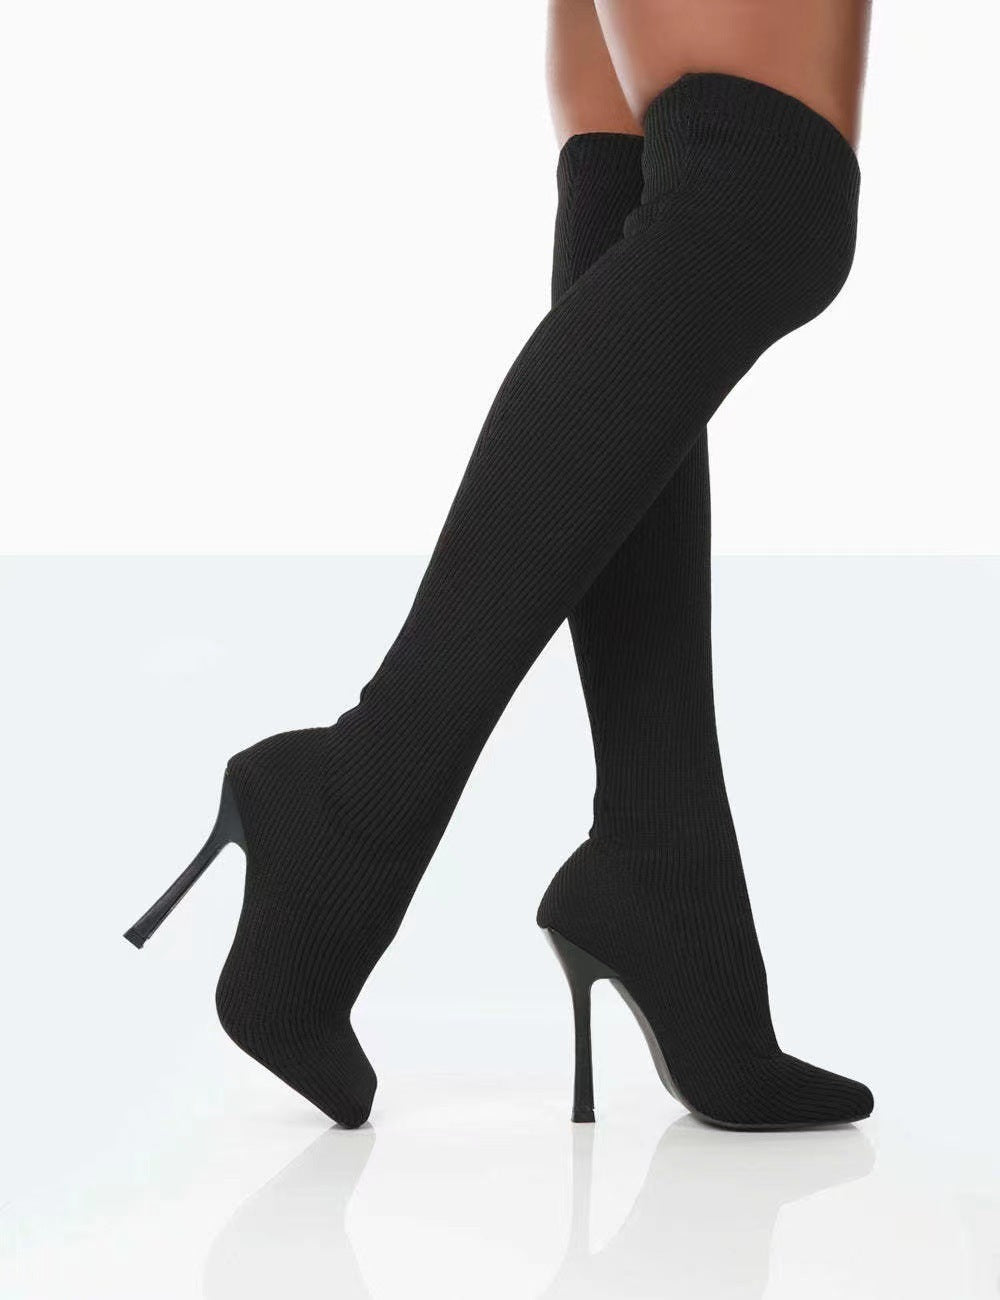 Thigh High Boots Women Over The Knee Long Boots Fashion Shoes